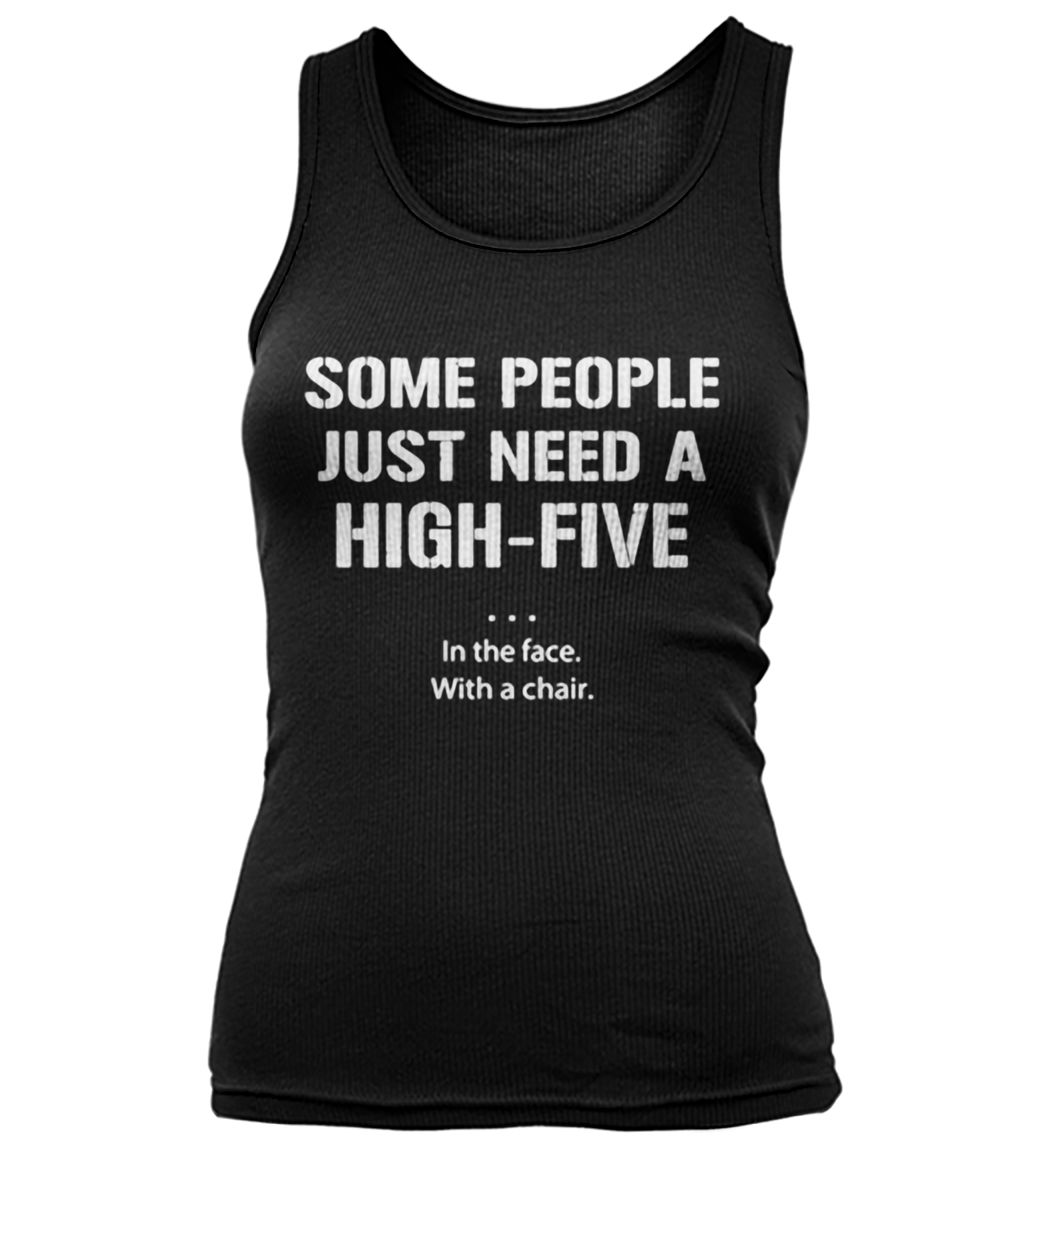 Some people just need a high five in the face with a chair women's tank top